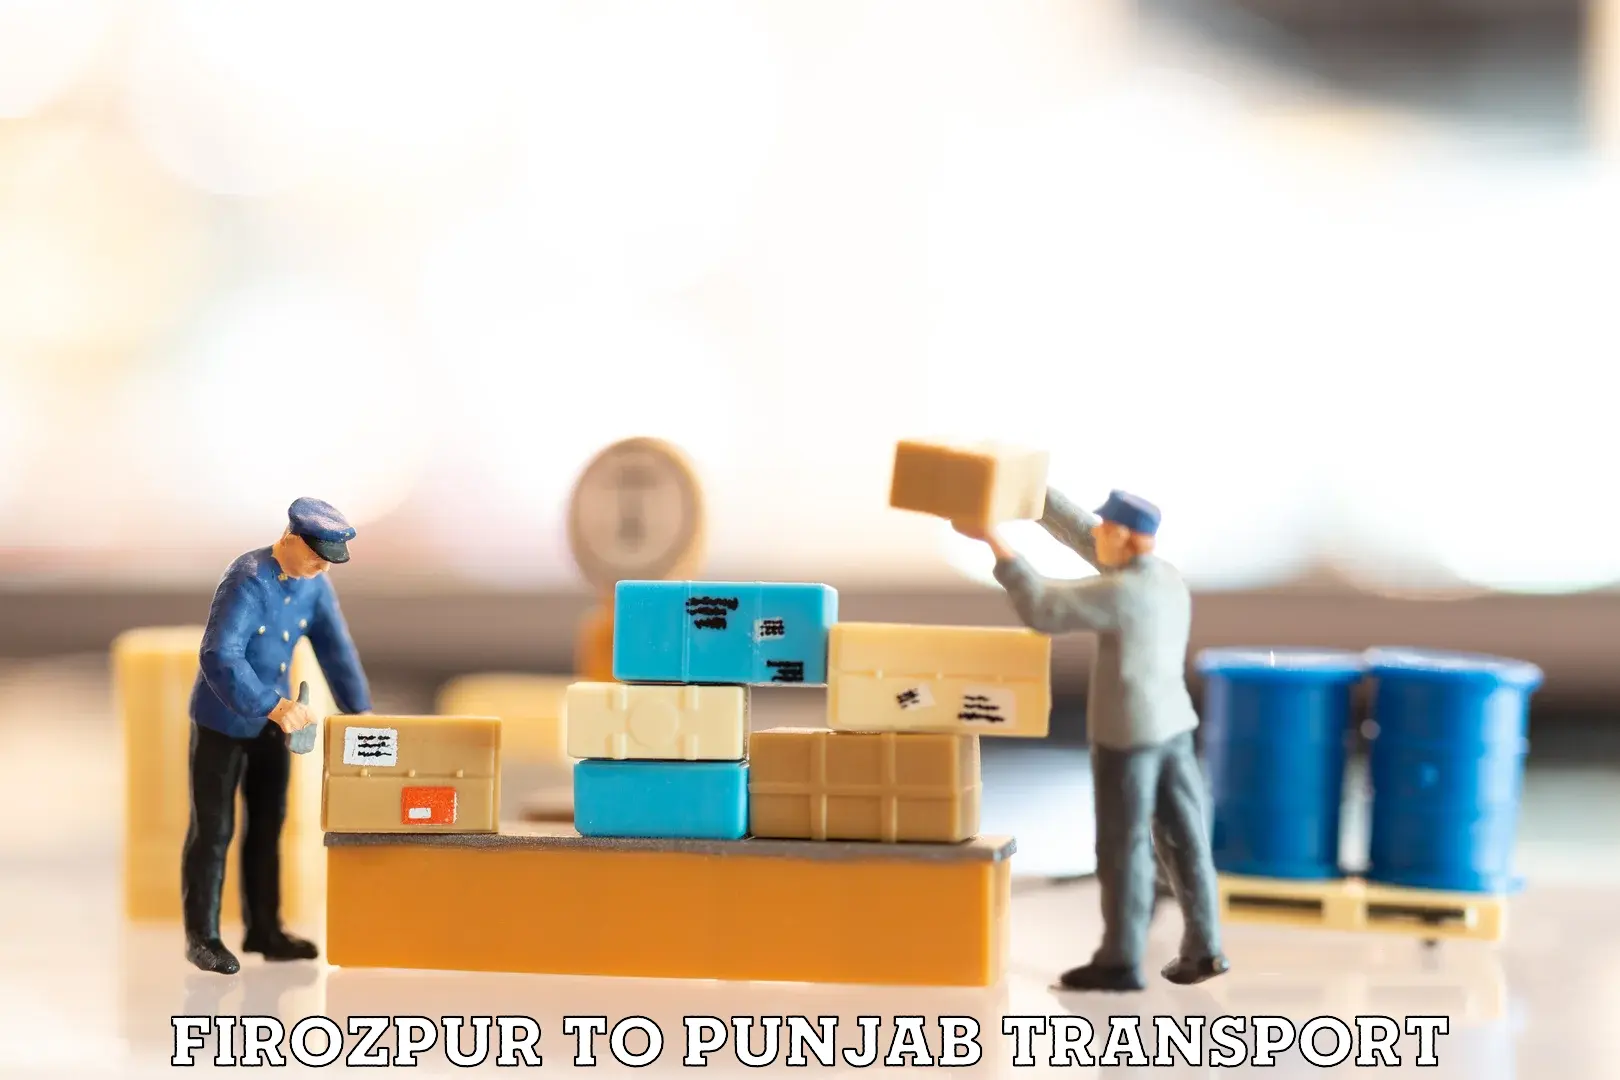 Cargo transport services Firozpur to Punjab